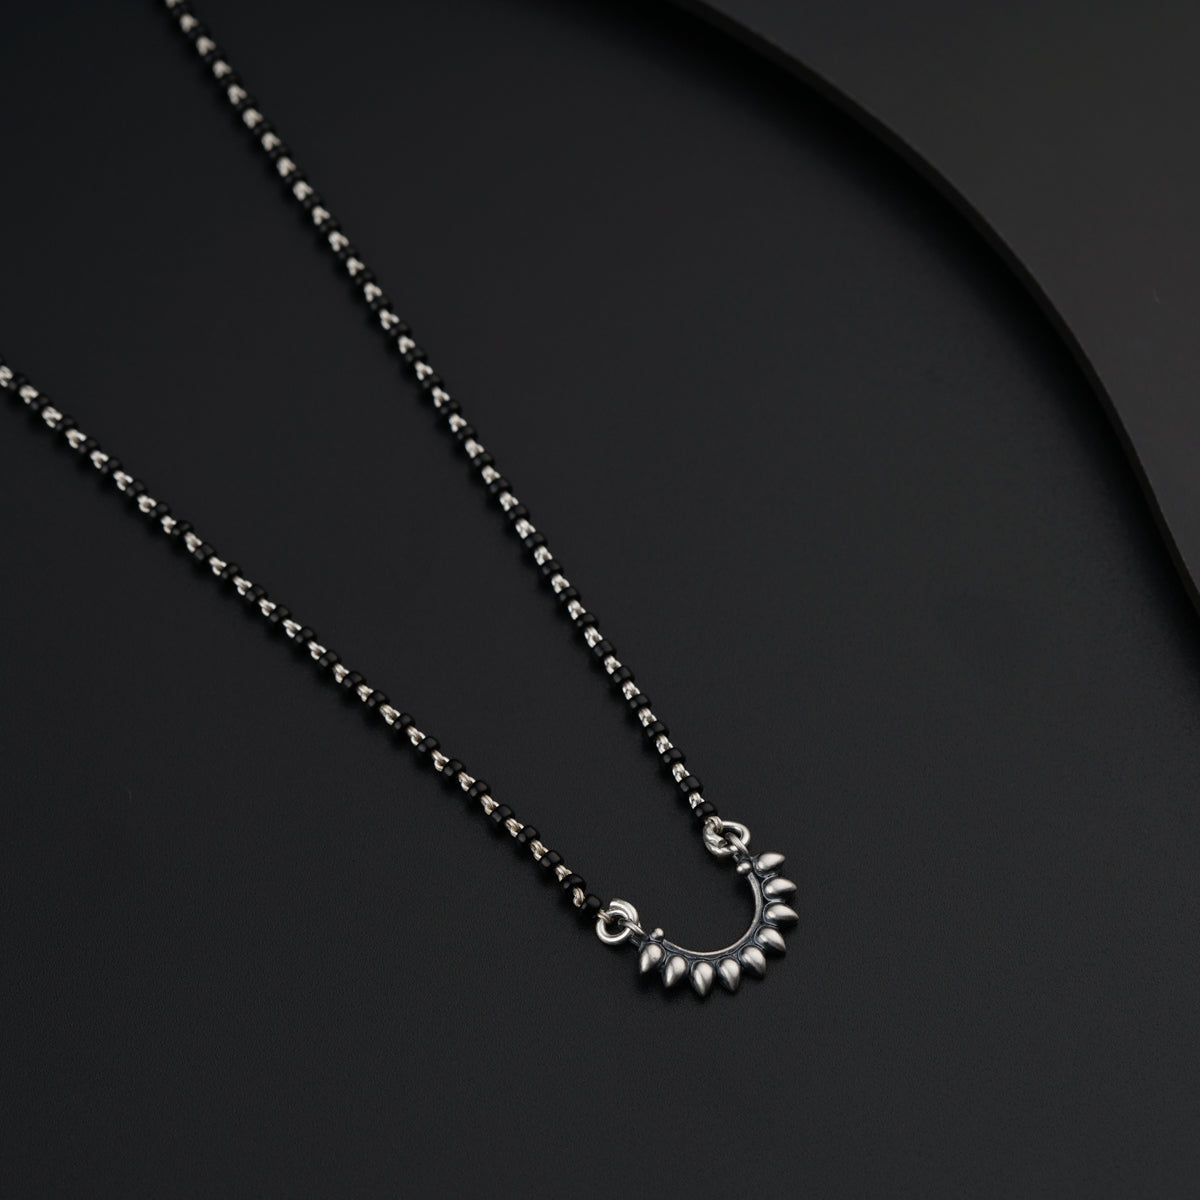 a necklace with a circular design on a black surface